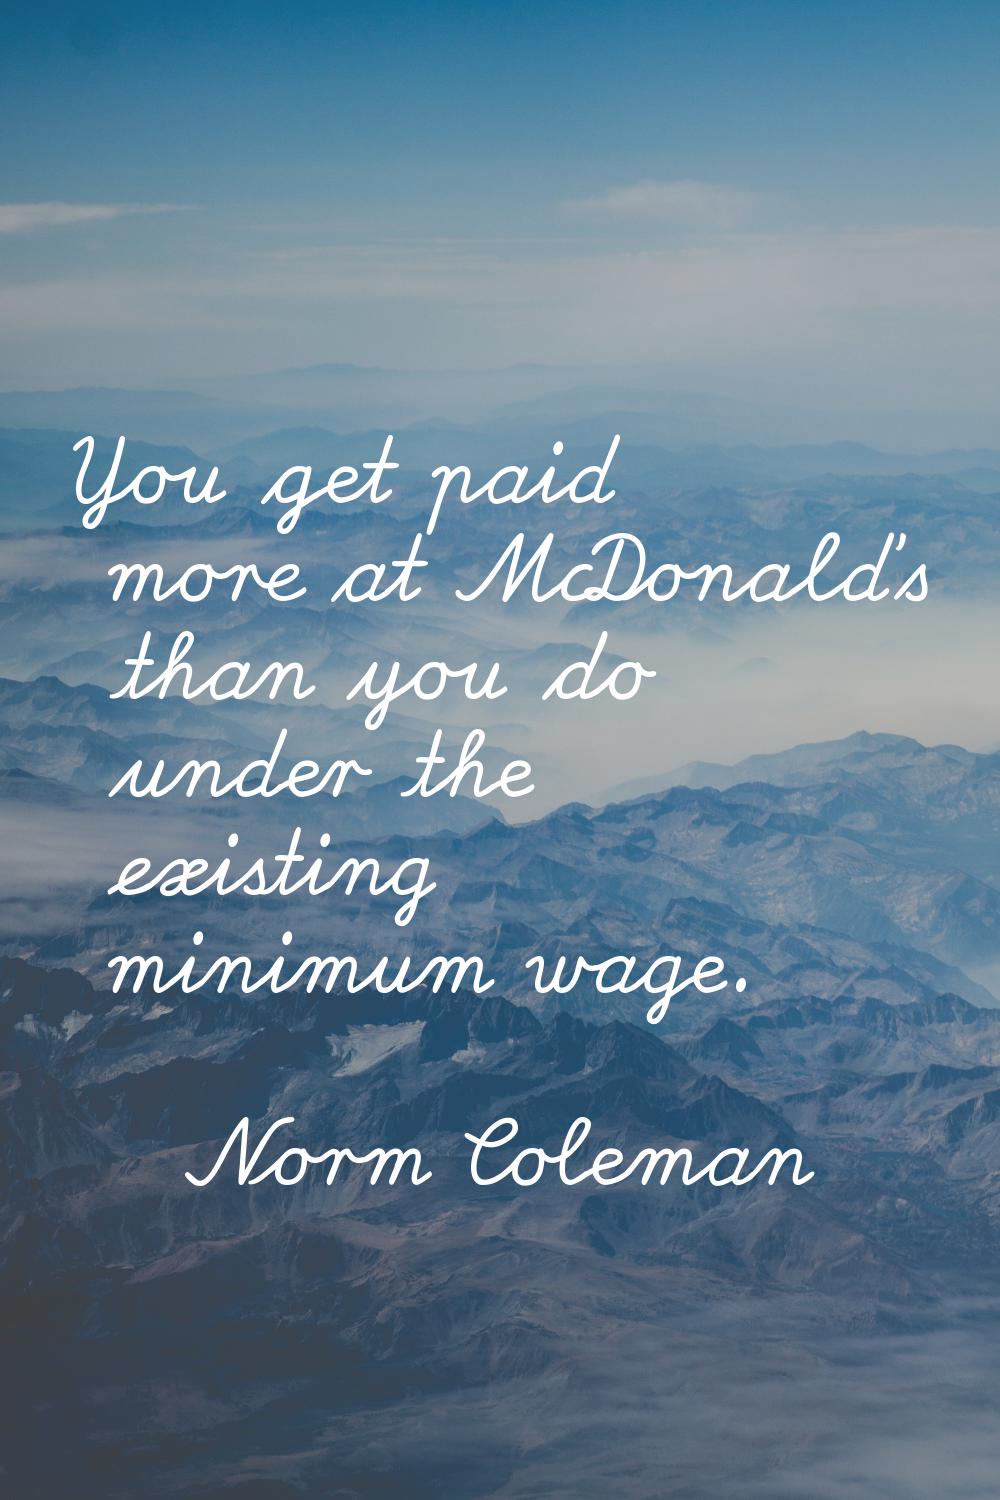 You get paid more at McDonald's than you do under the existing minimum wage.